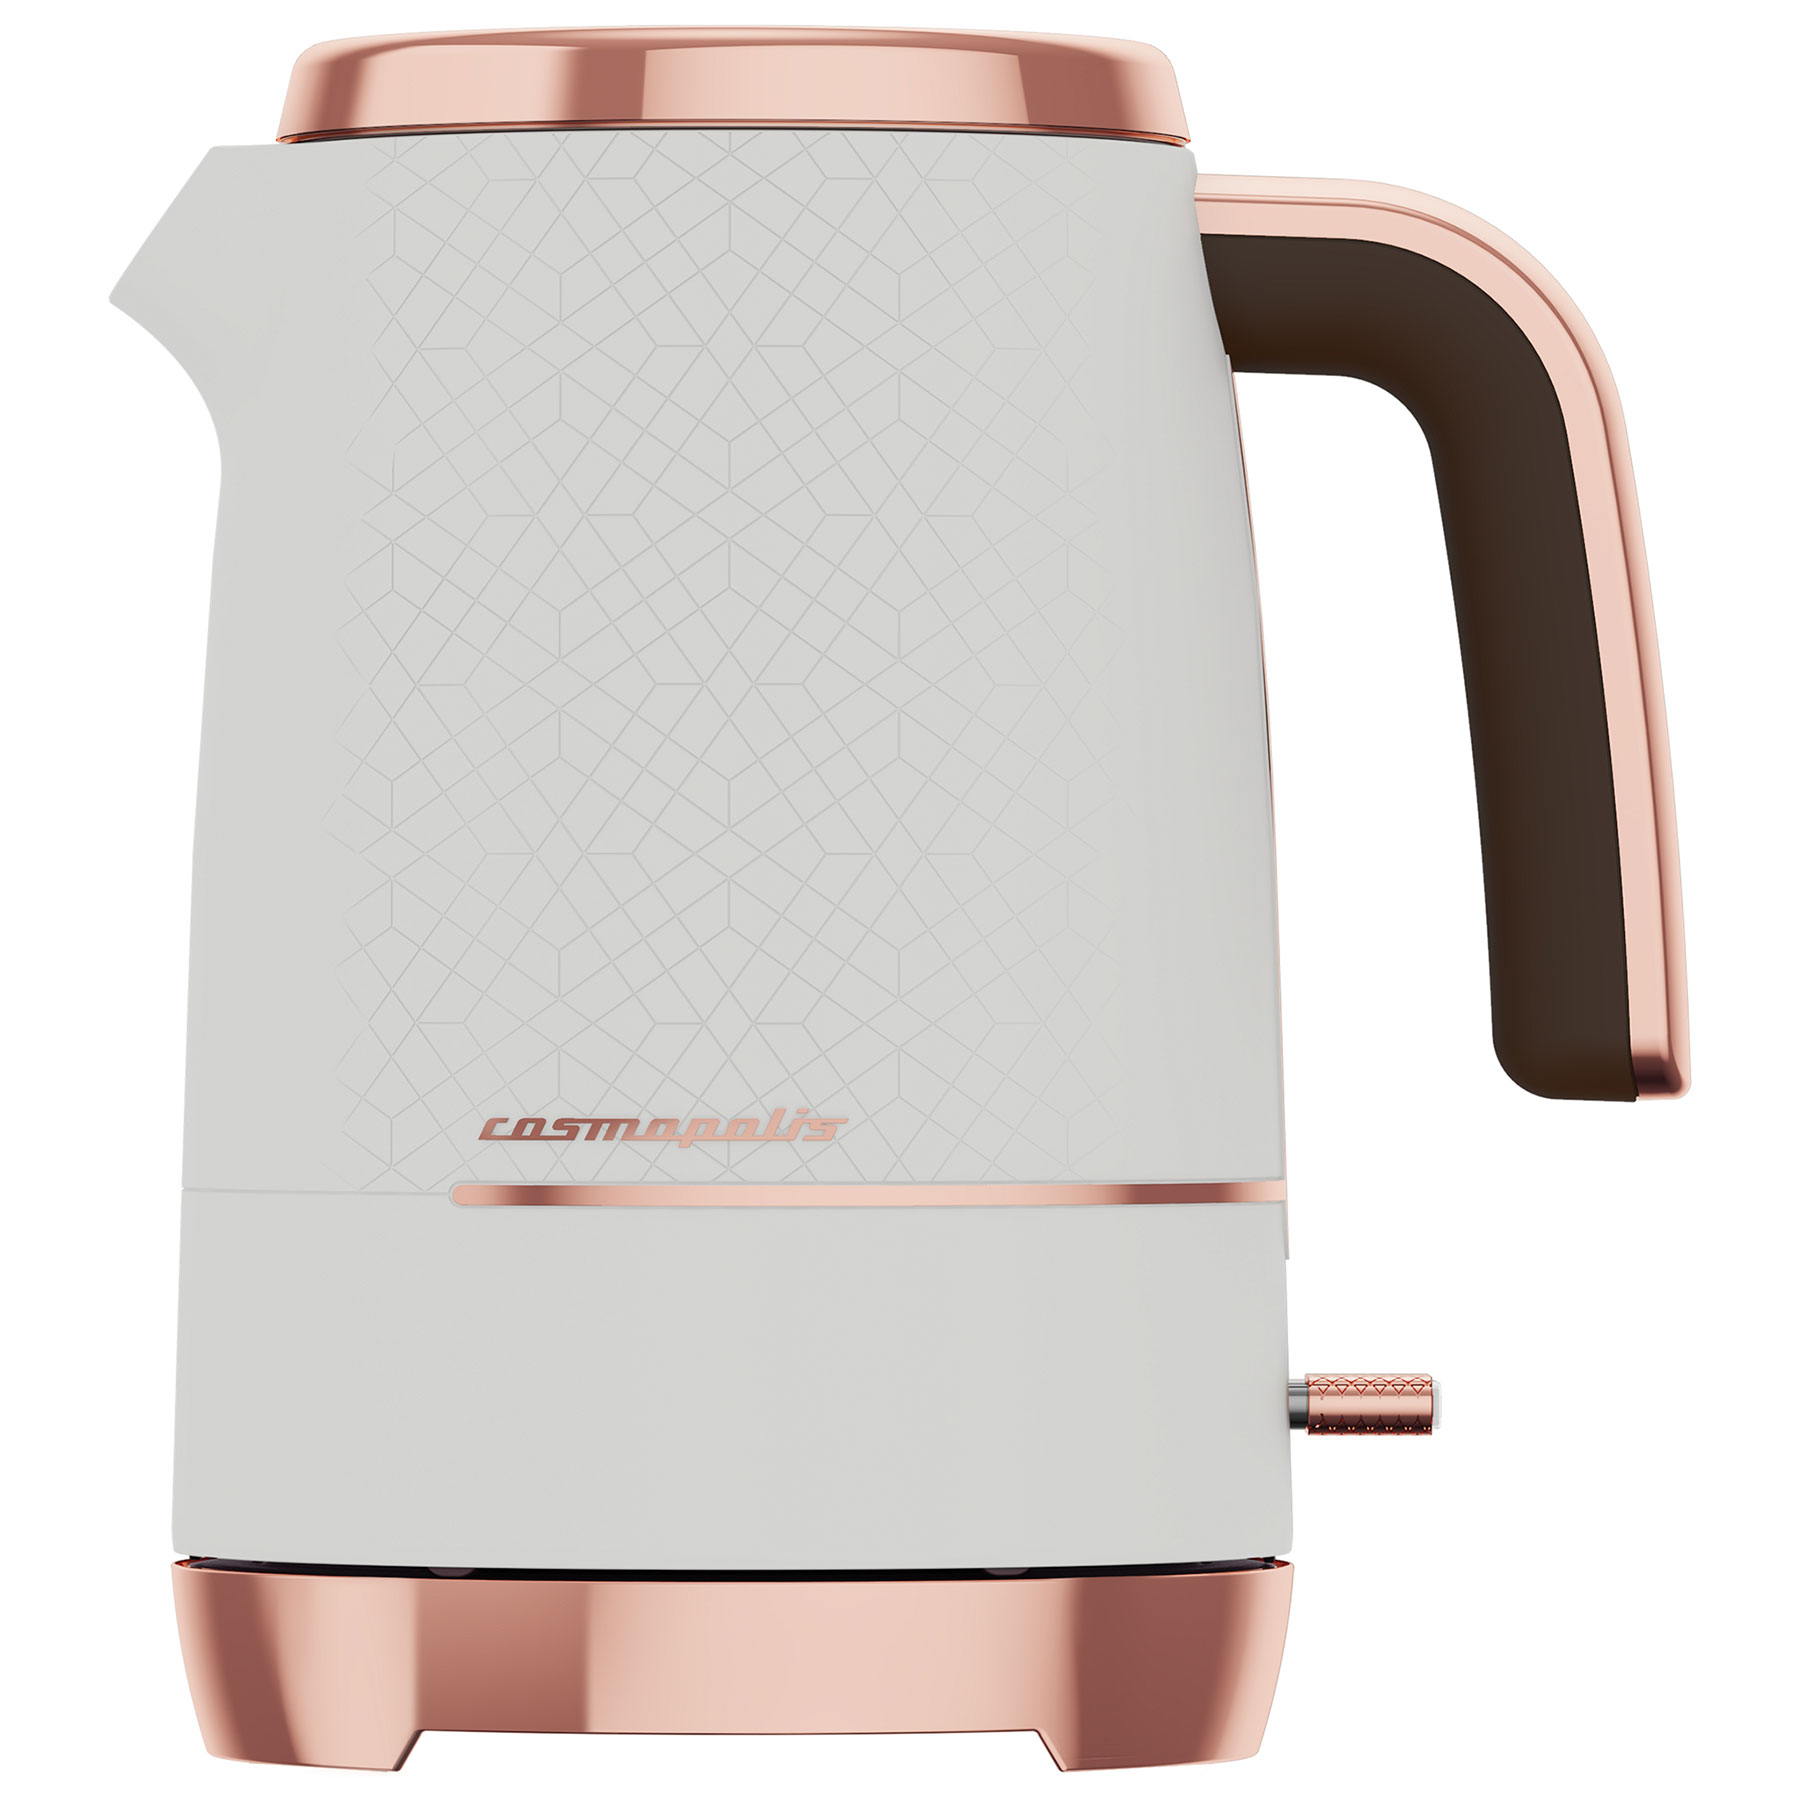 Image of Beko WKM8306W Cosmopolis Kettle in White and Rose Gold